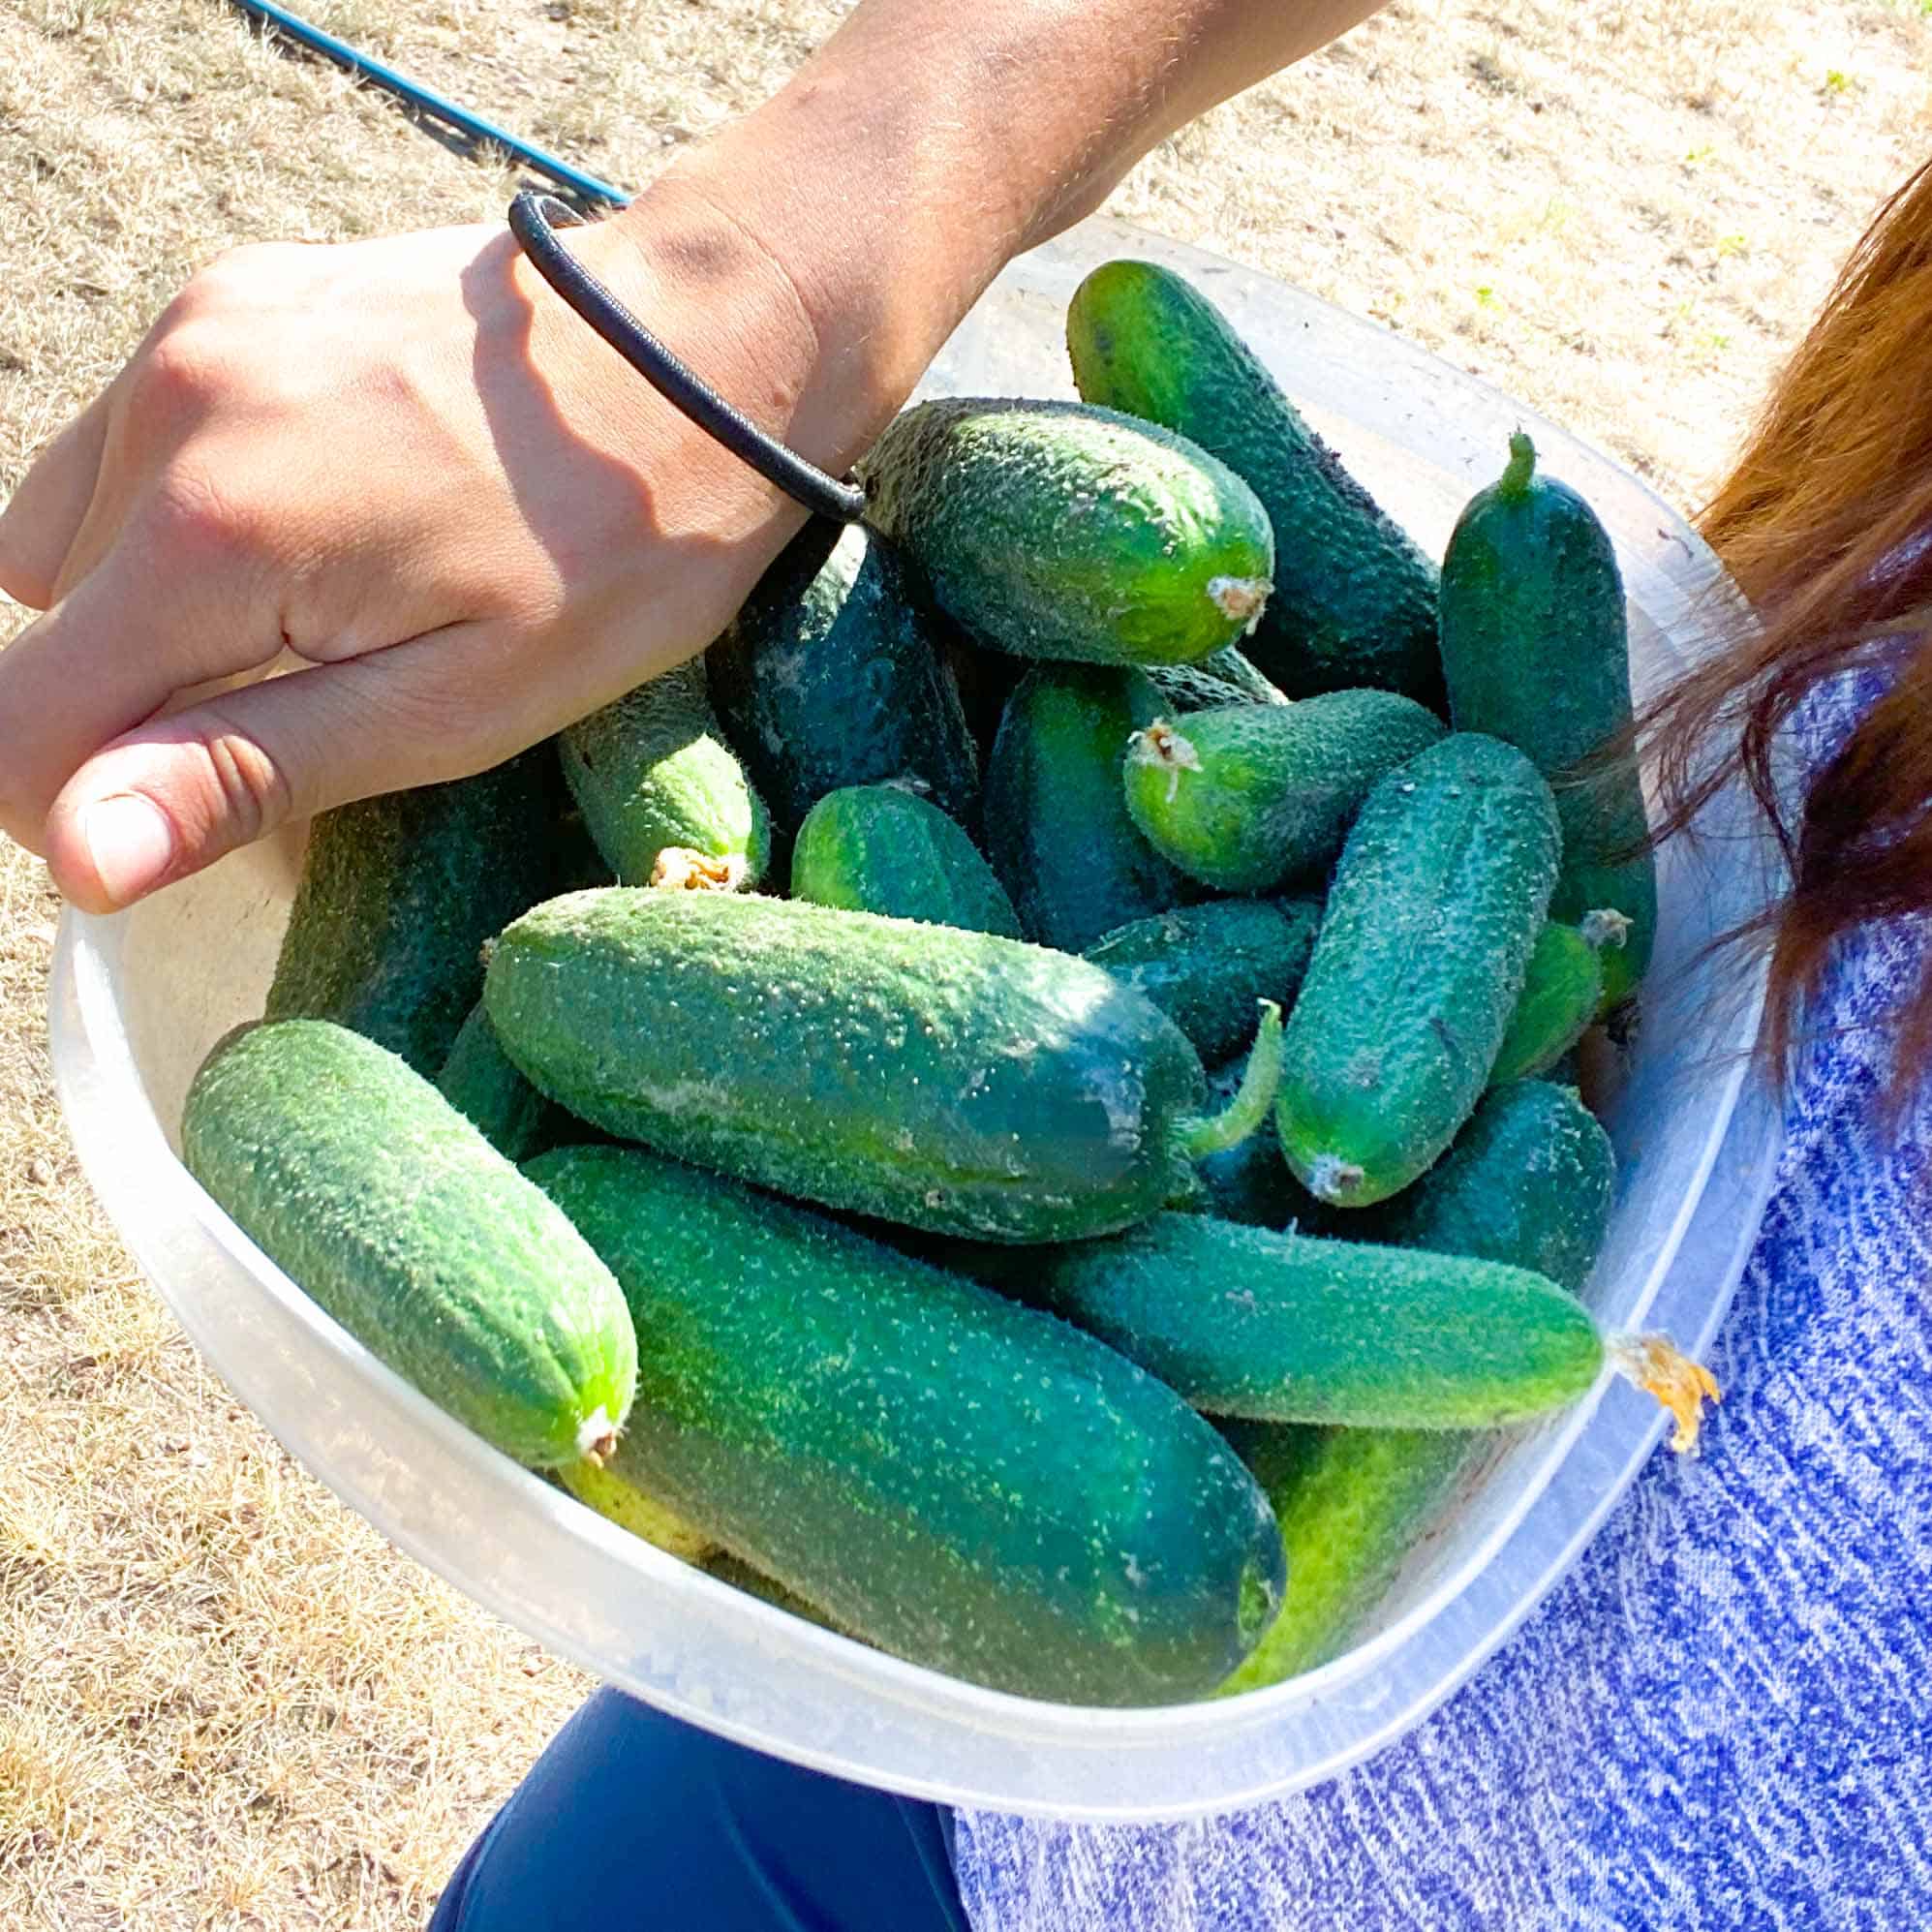 Container full of pickling cucumbers fresh from the garden.